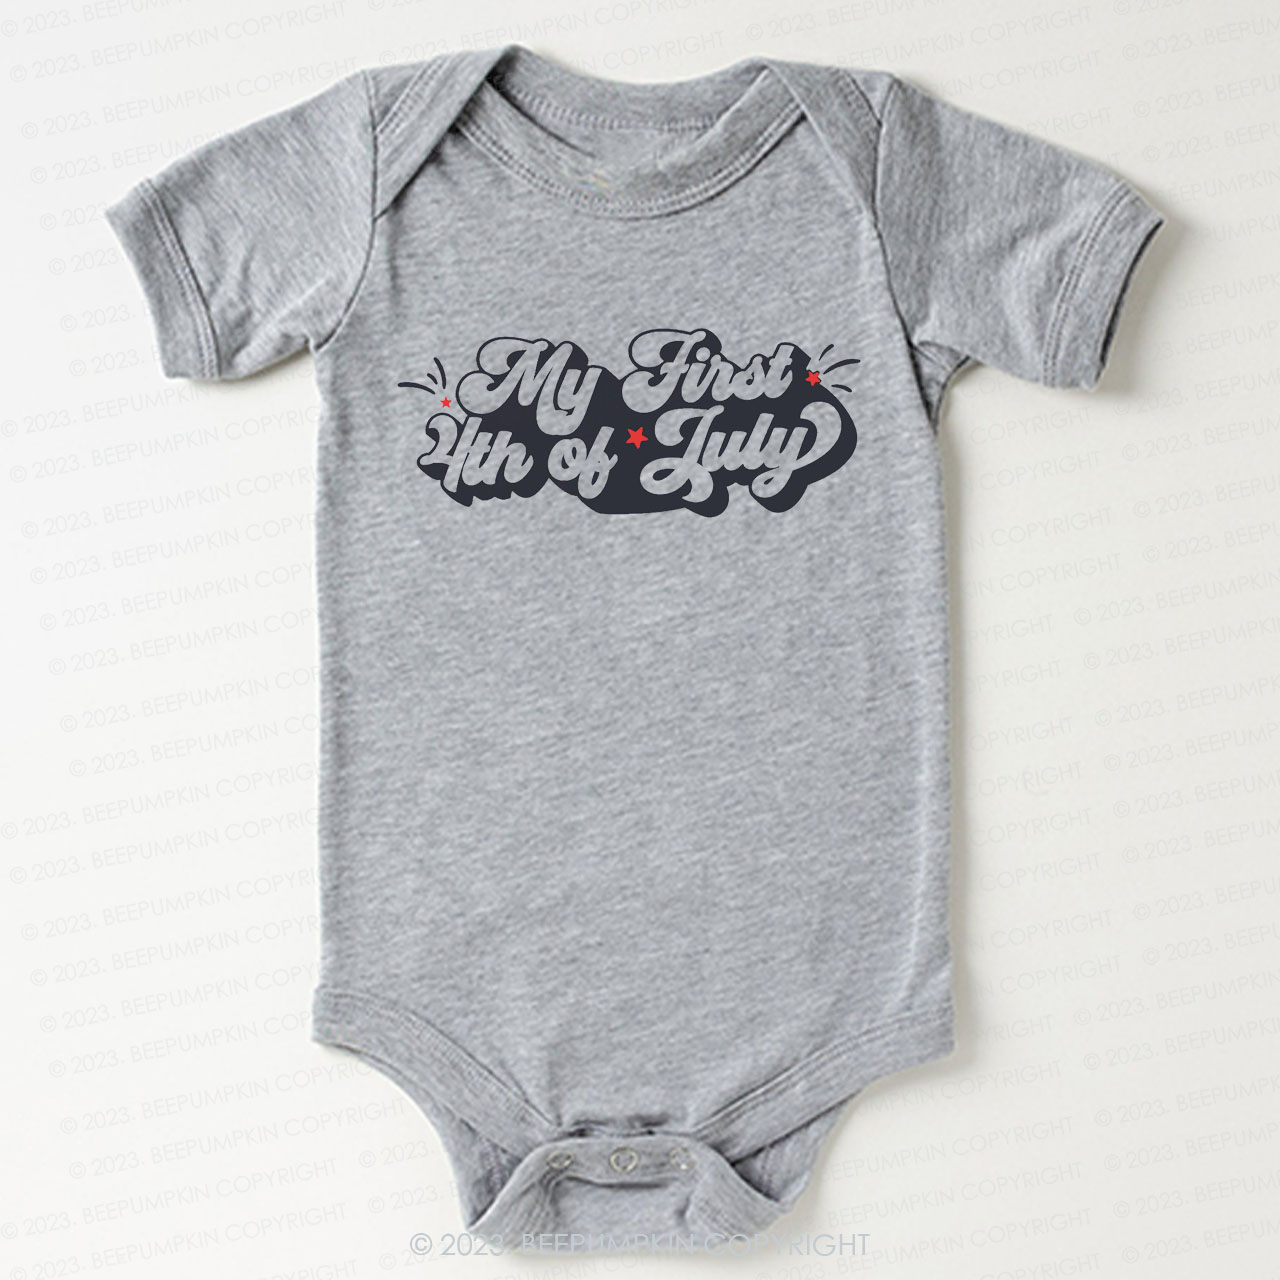 How stinking cute is this  pinsy dupe bodysuit?! #bodysuit